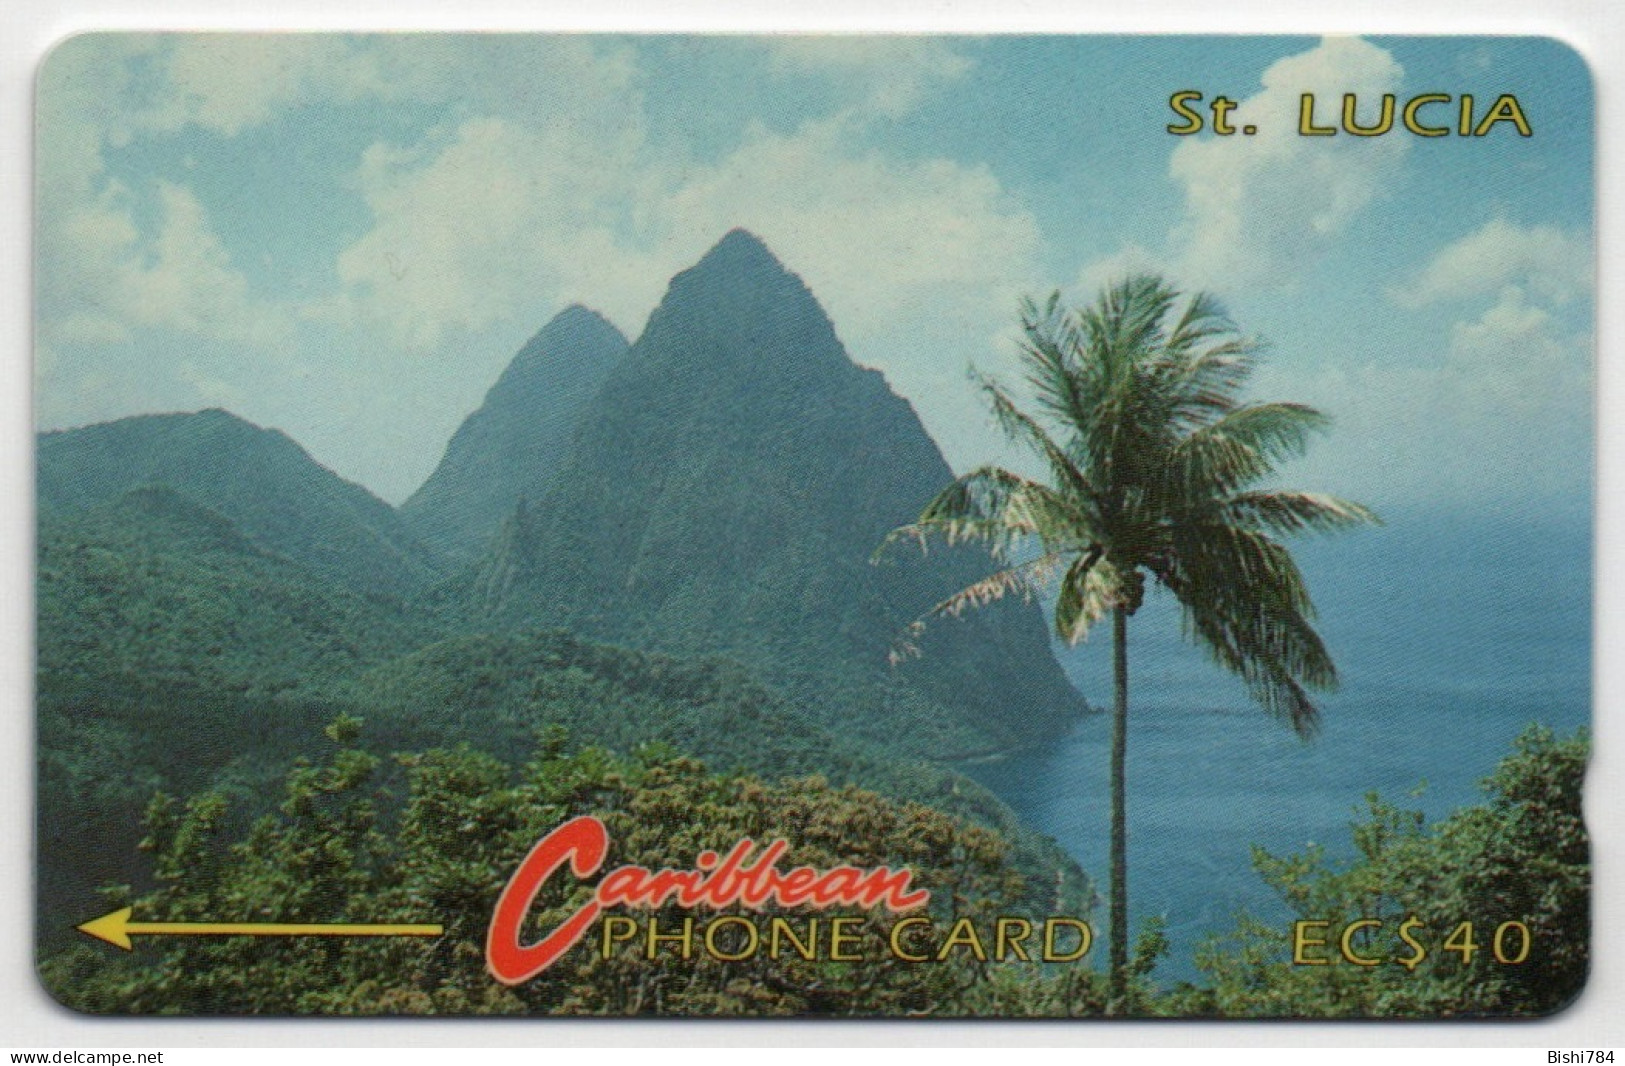 St. Lucia - Pitons - 3CSLC (Short, Italic Font With Curved 3) - Santa Lucia